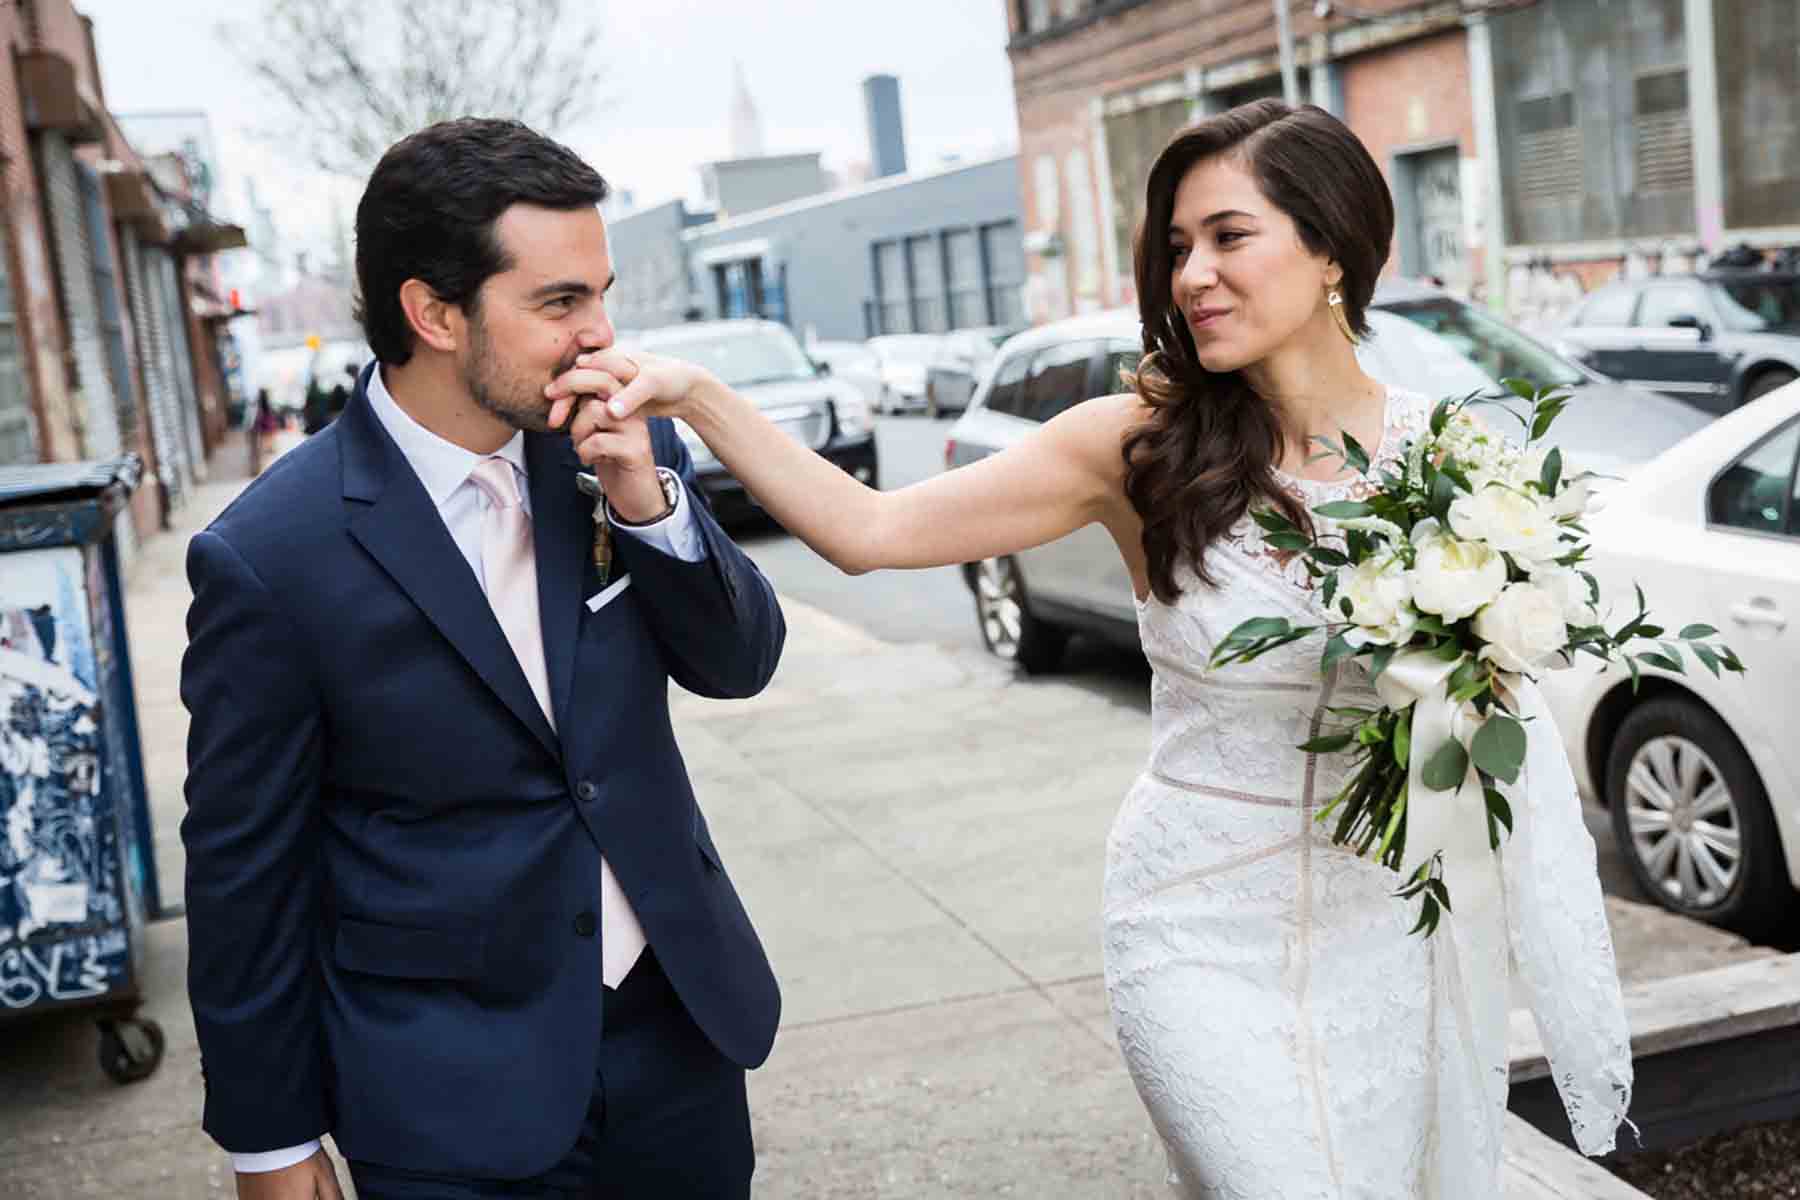 Groom kissing bride's hand on sidewalk for an article on how to save money on wedding photography